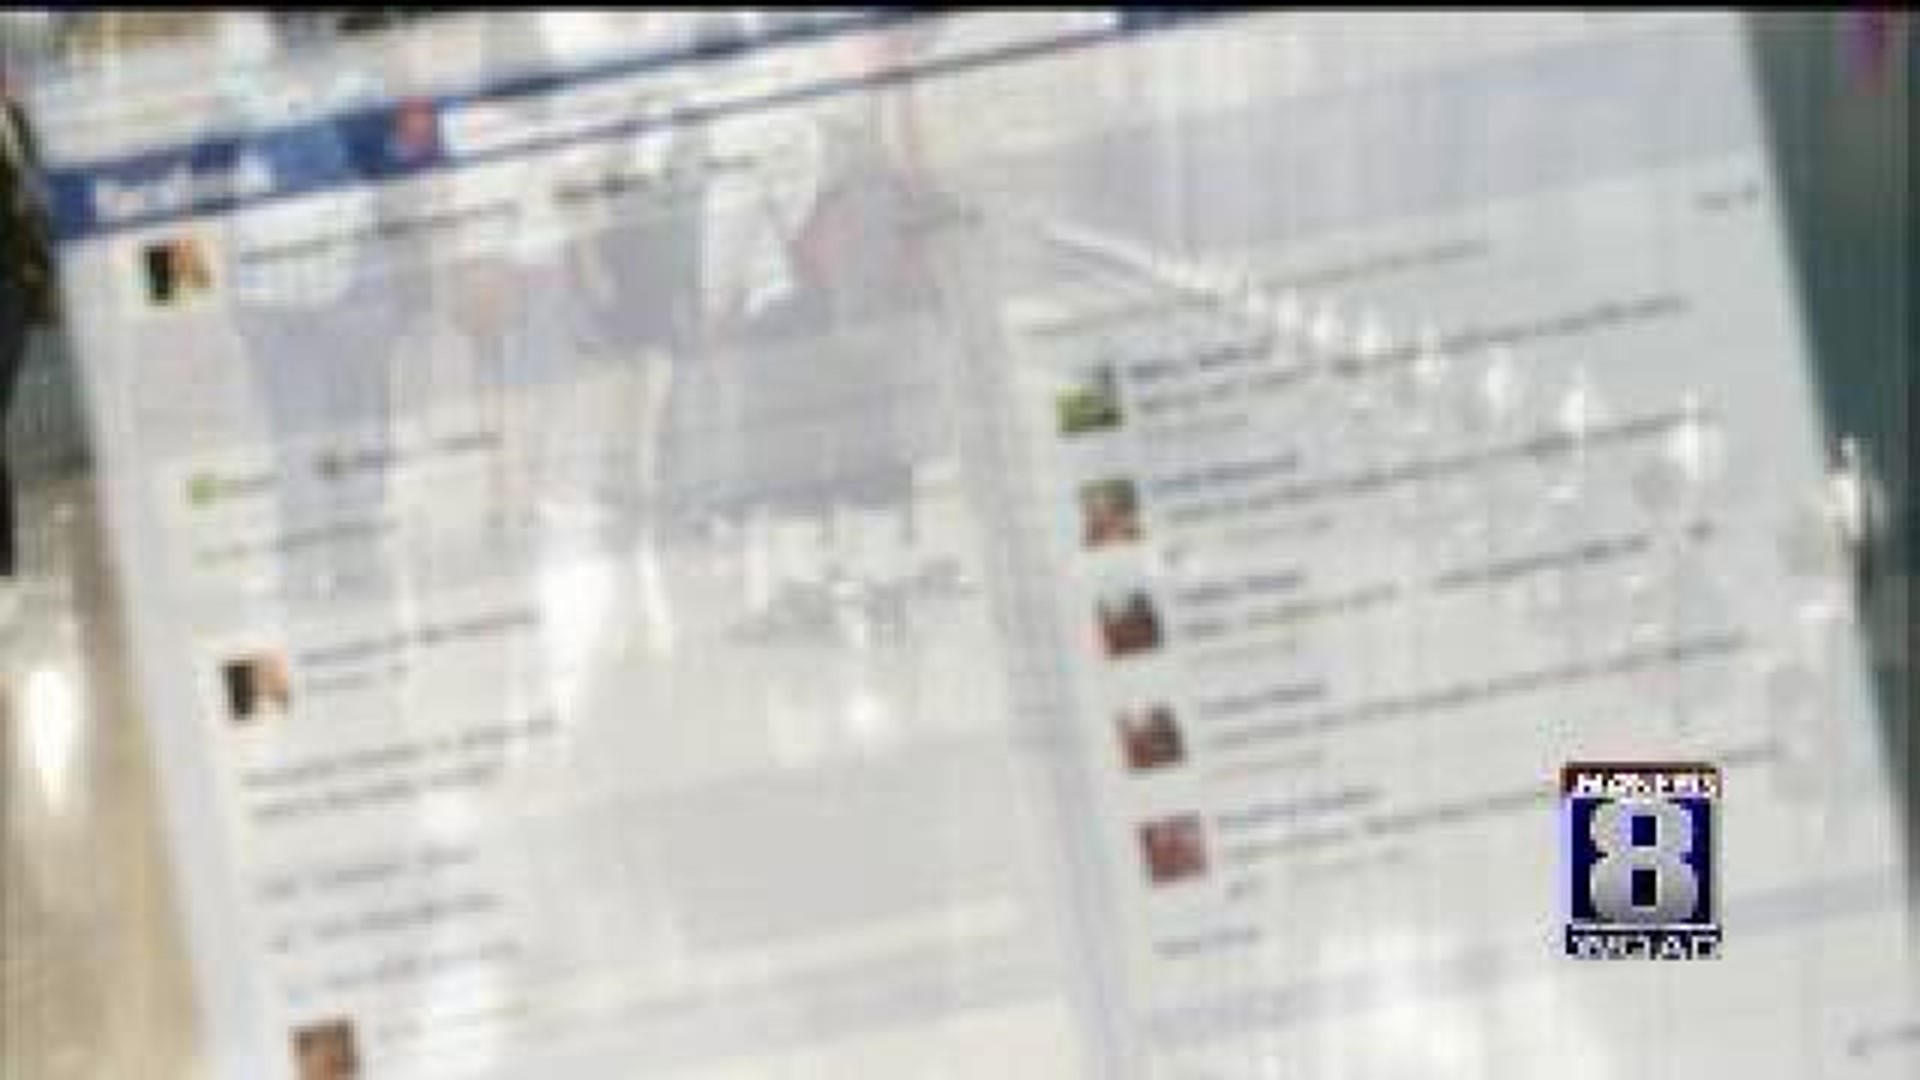 Dixon police search for cyber-bully